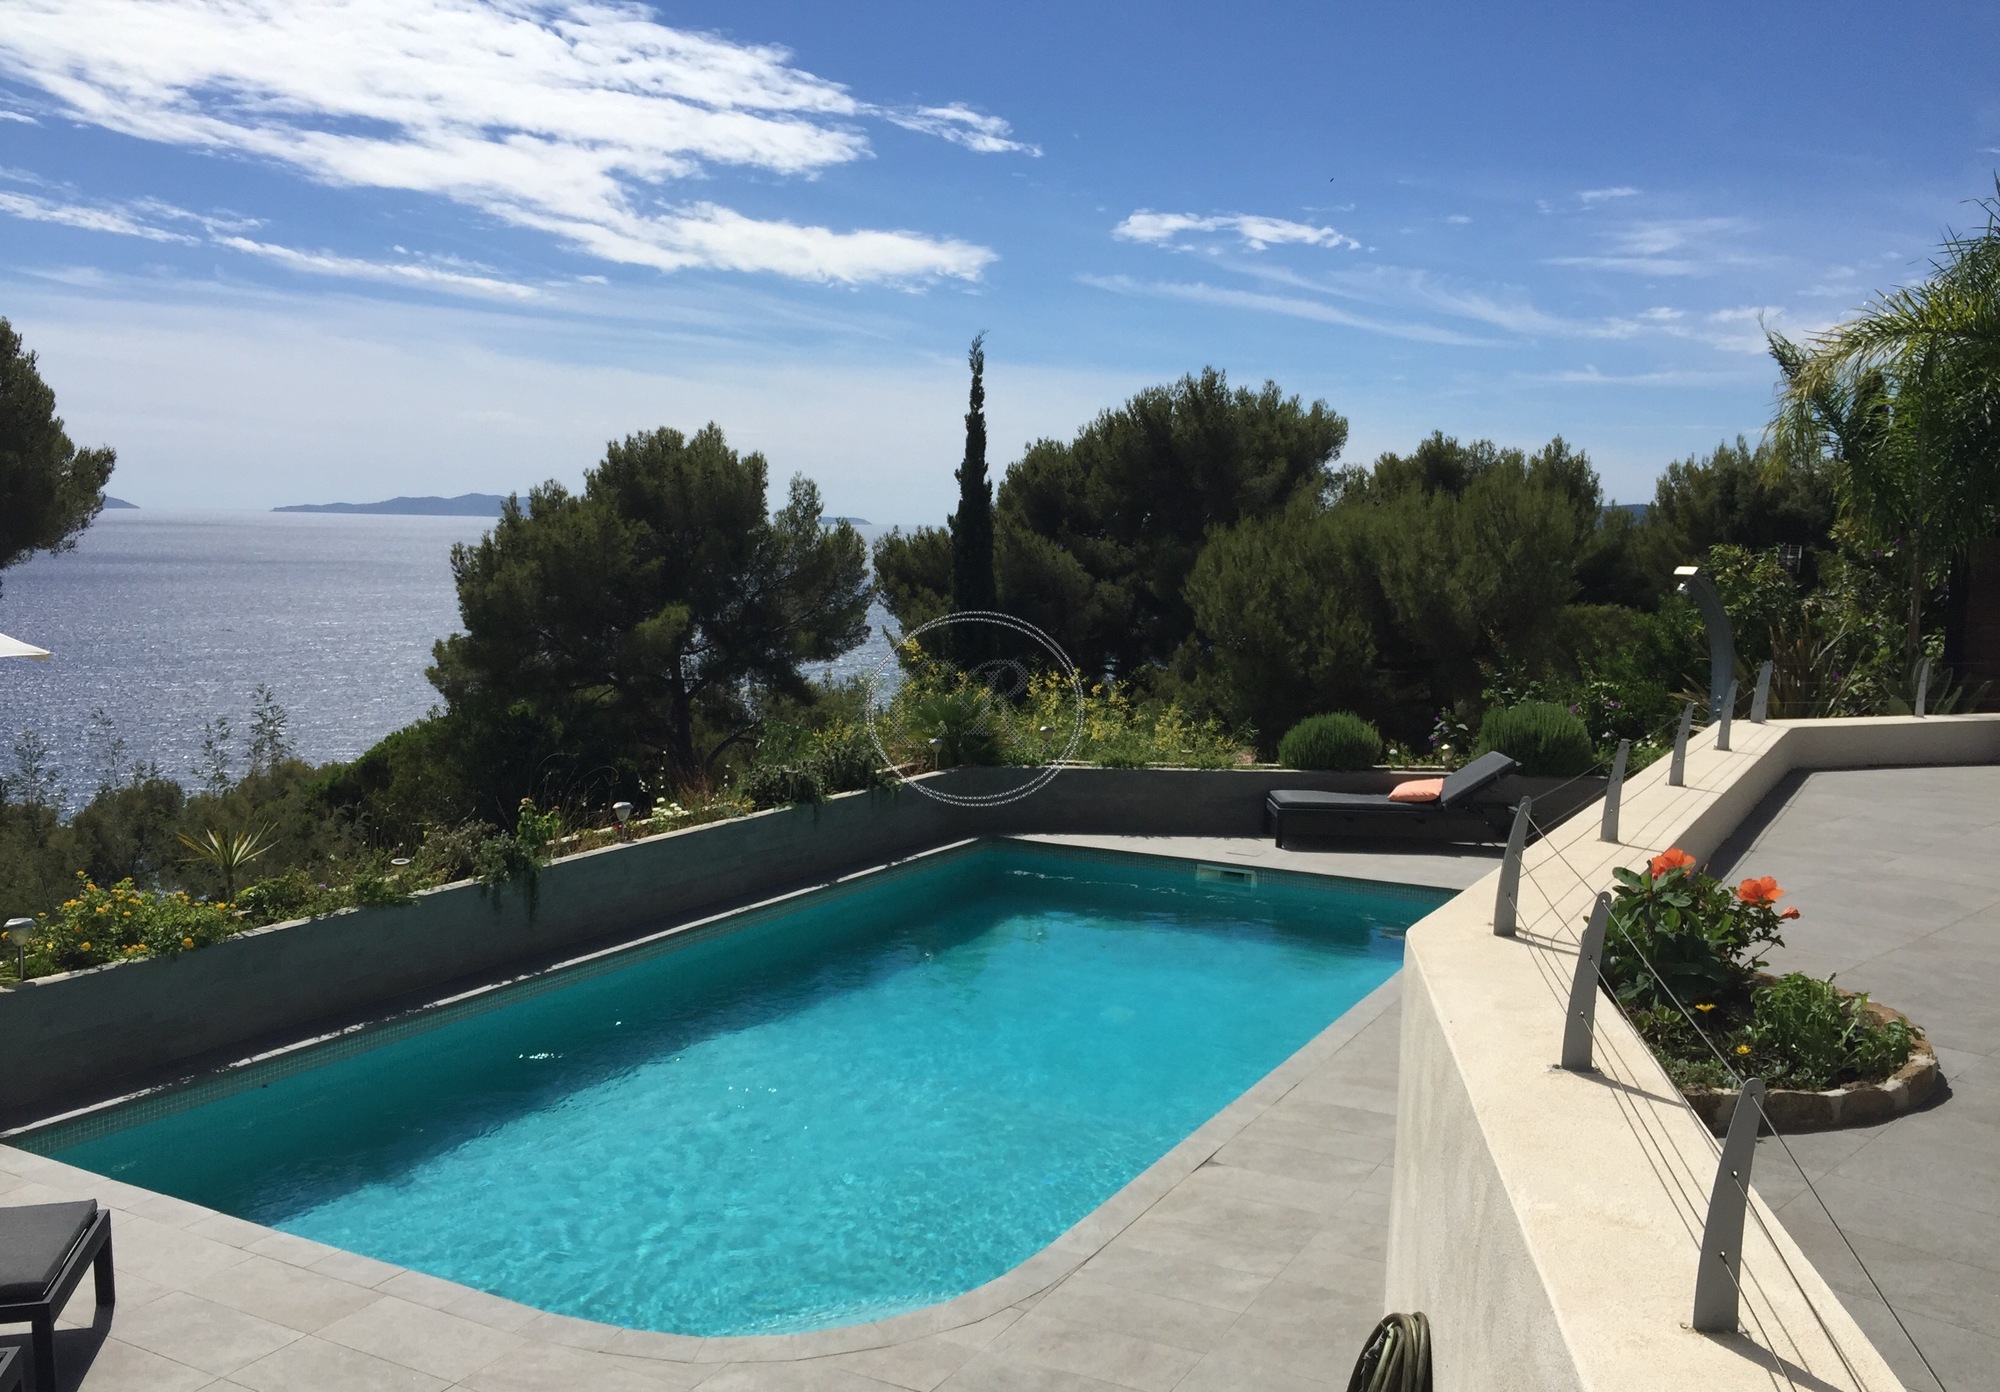 Beautiful luxury villa with swimming pool in Le Lavandou - Aiguebelle.